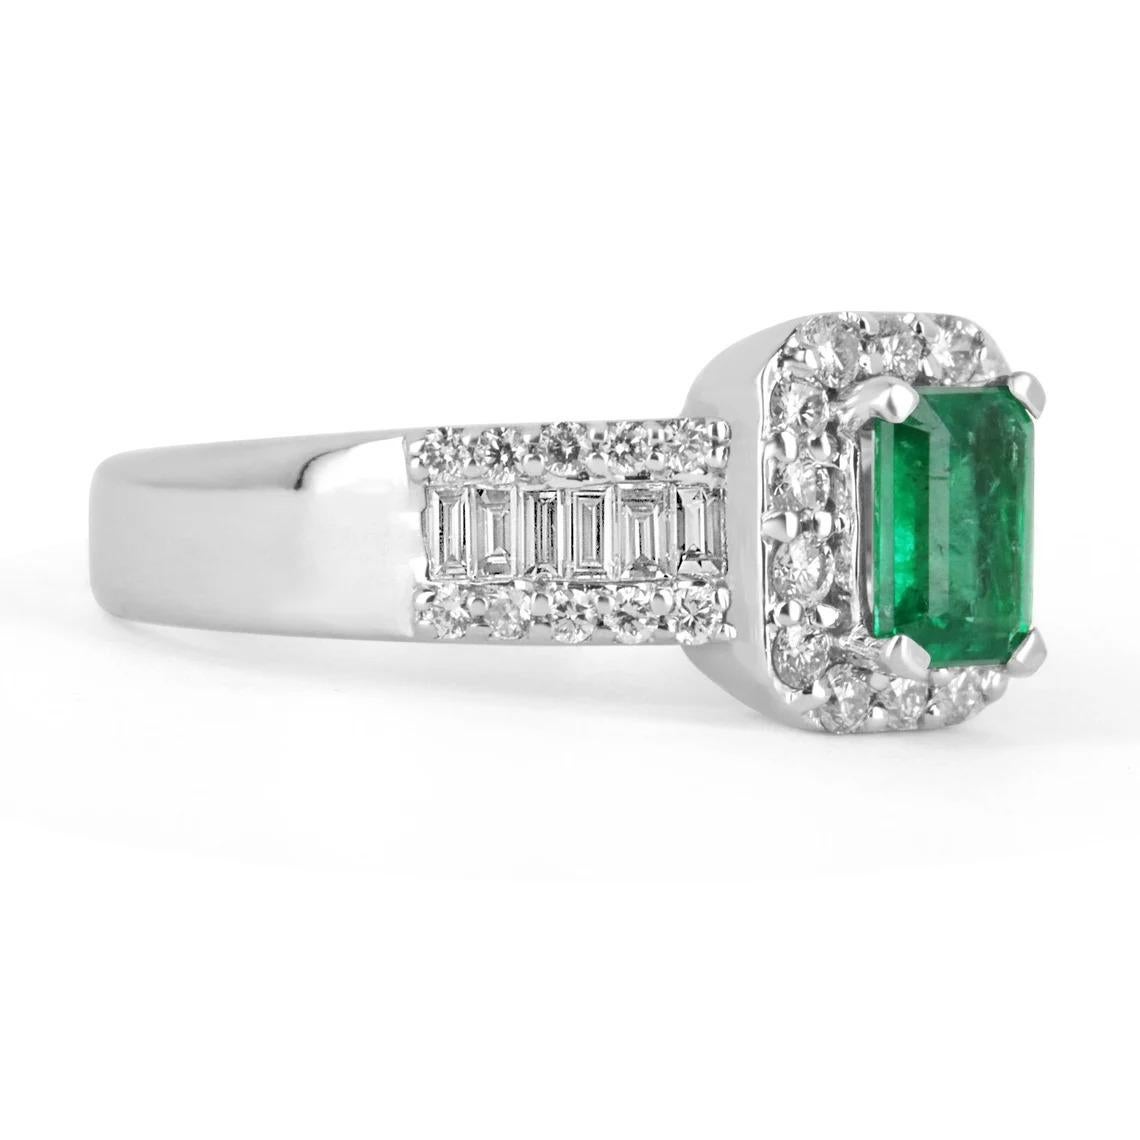 Elegance and sophistication are what this gorgeous emerald and diamond ring is all about. The emerald is a full 0.70-carats, accented by brilliant round diamonds creating a gorgeous halo around the center stone. The shank includes round and baguette